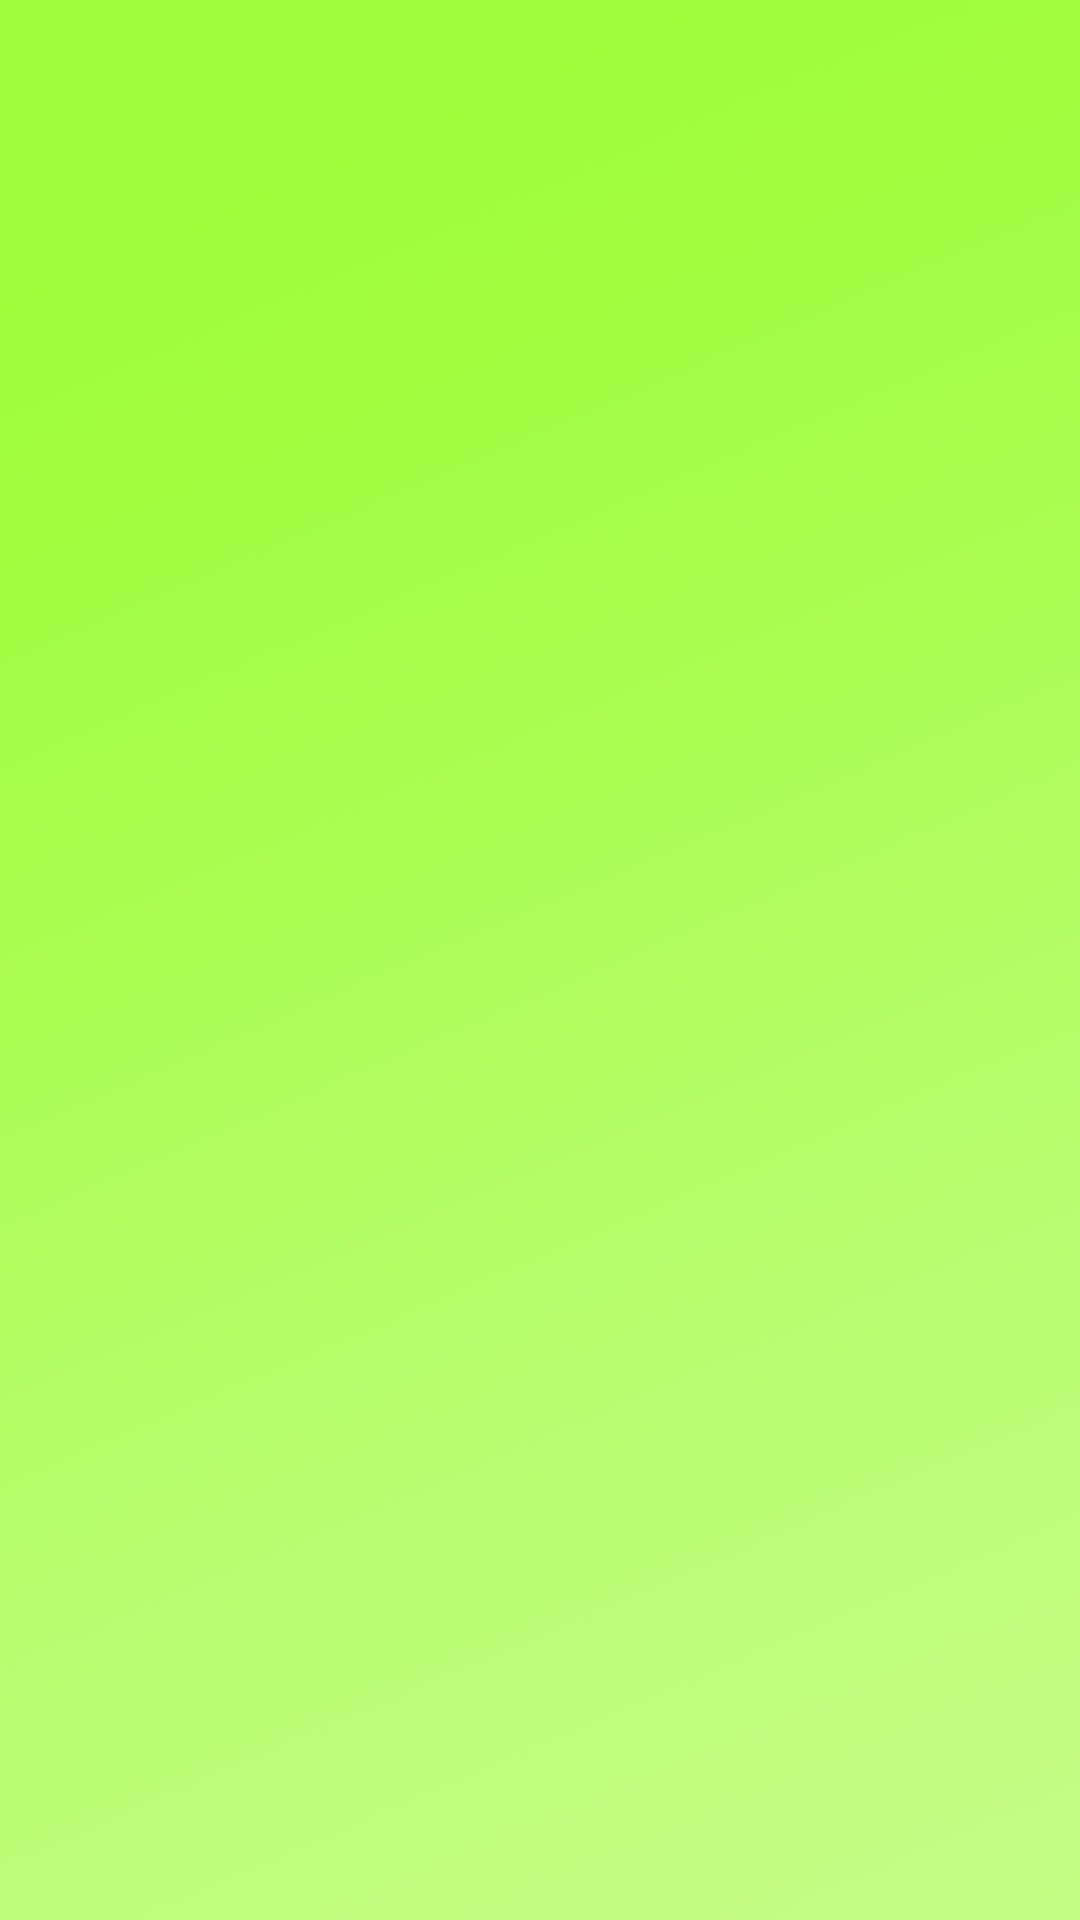 Lime Green wallpaper with abstract wavy lines Wallpaper